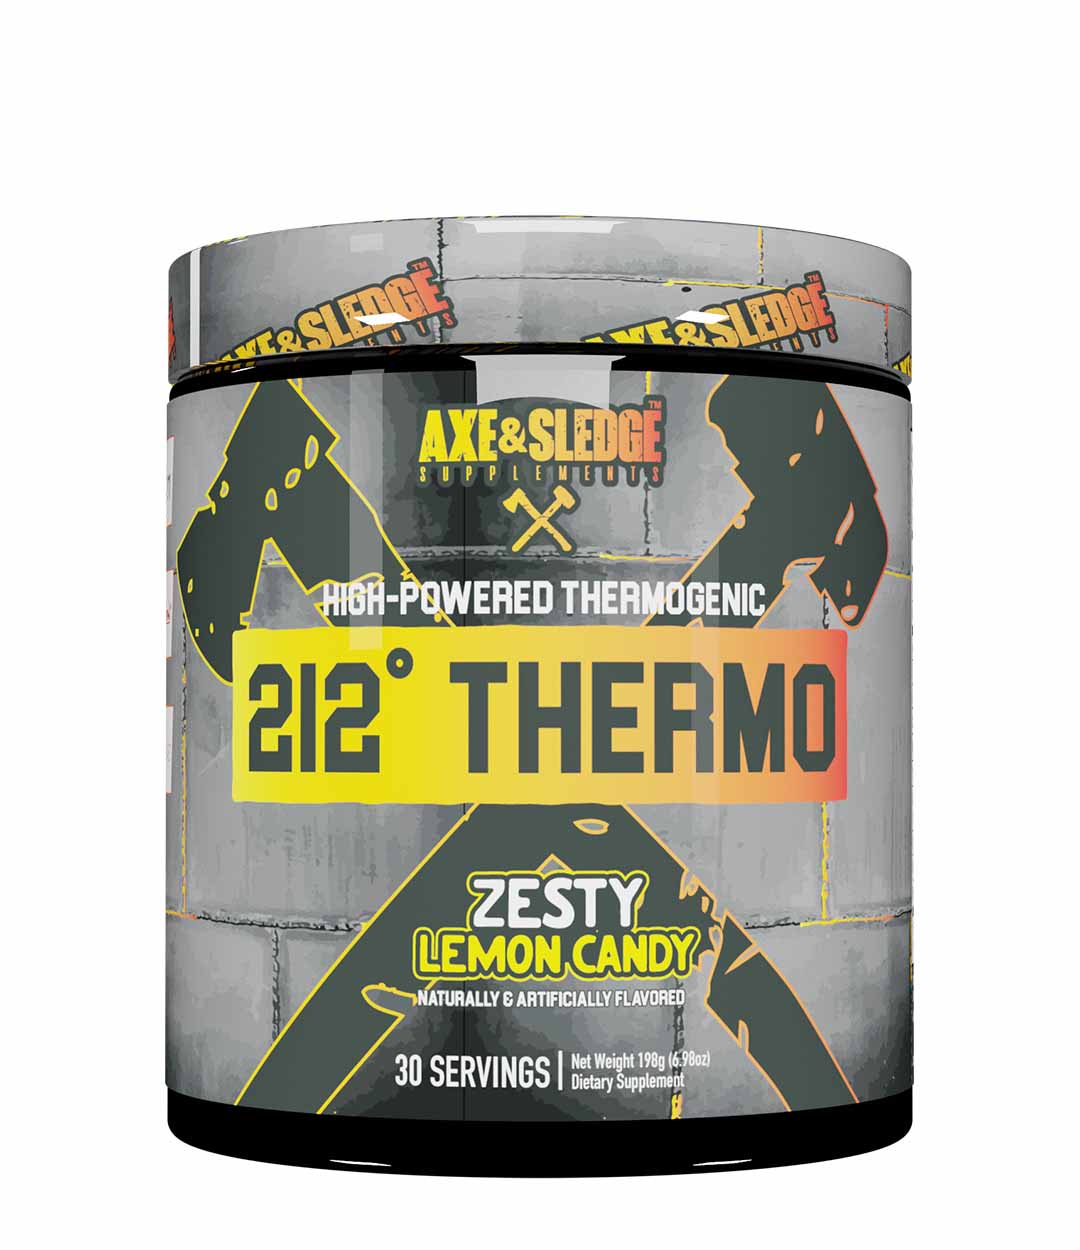 Axe & Sledge's 212° Thermo, the pinnacle of high-powered thermogenic supplements. Crafted with precision and passion, this cutting-edge formula is designed to elevate your fitness journey by stoking the metabolic flames, melting away excess fat, and revealing the sculpted physique you've been working towards.